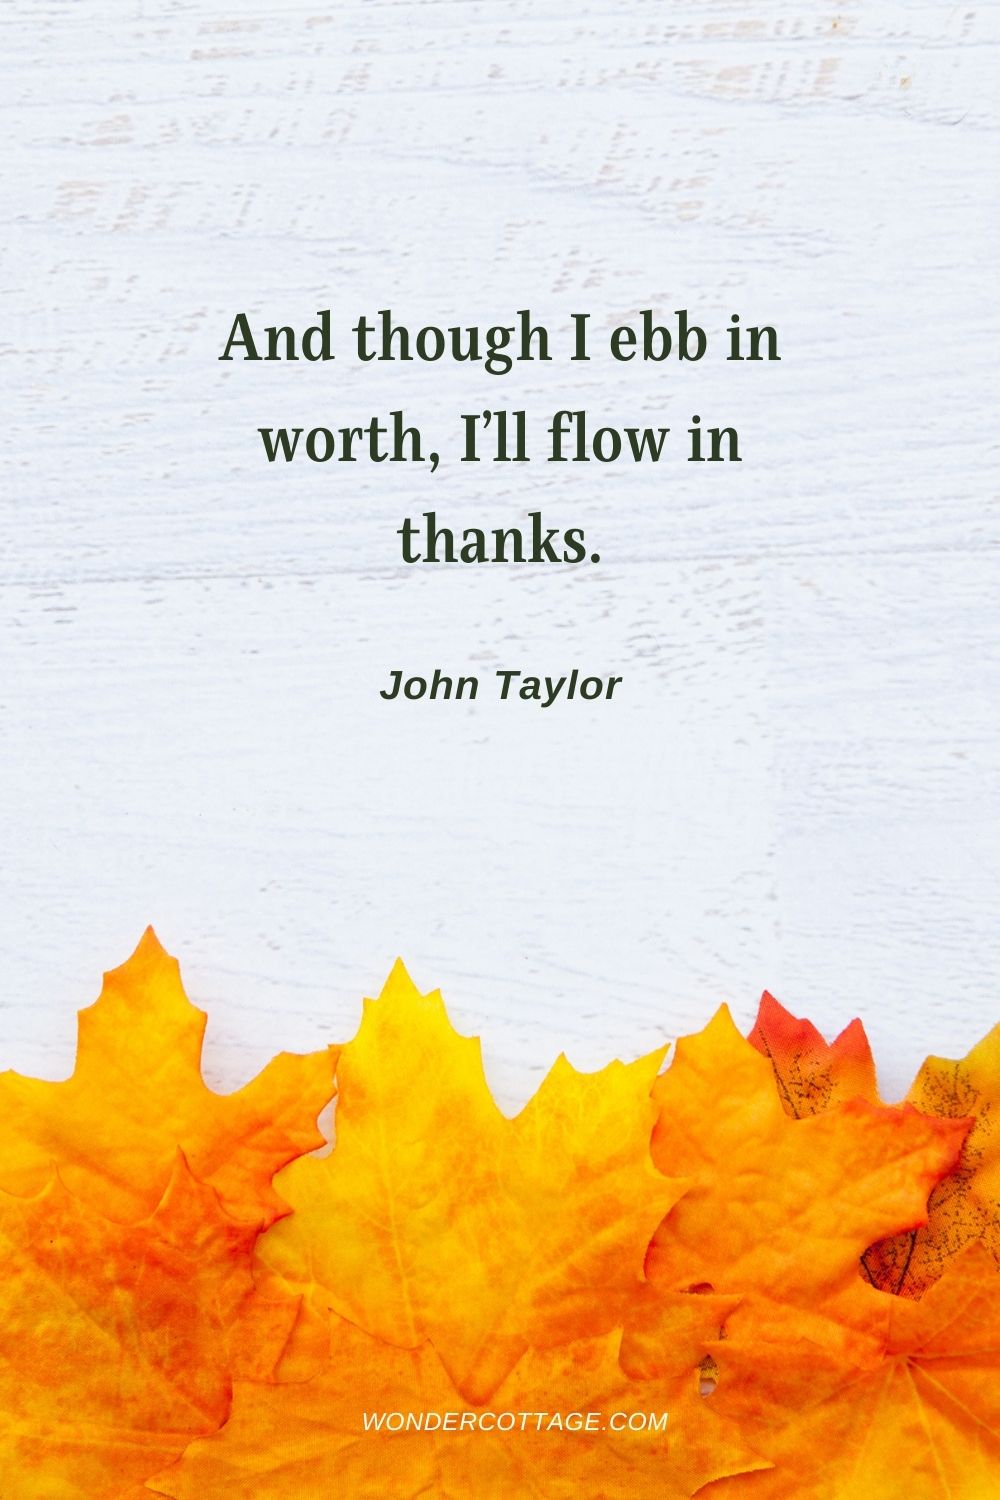 And though I ebb in worth, I’ll flow in thanks. John Taylor